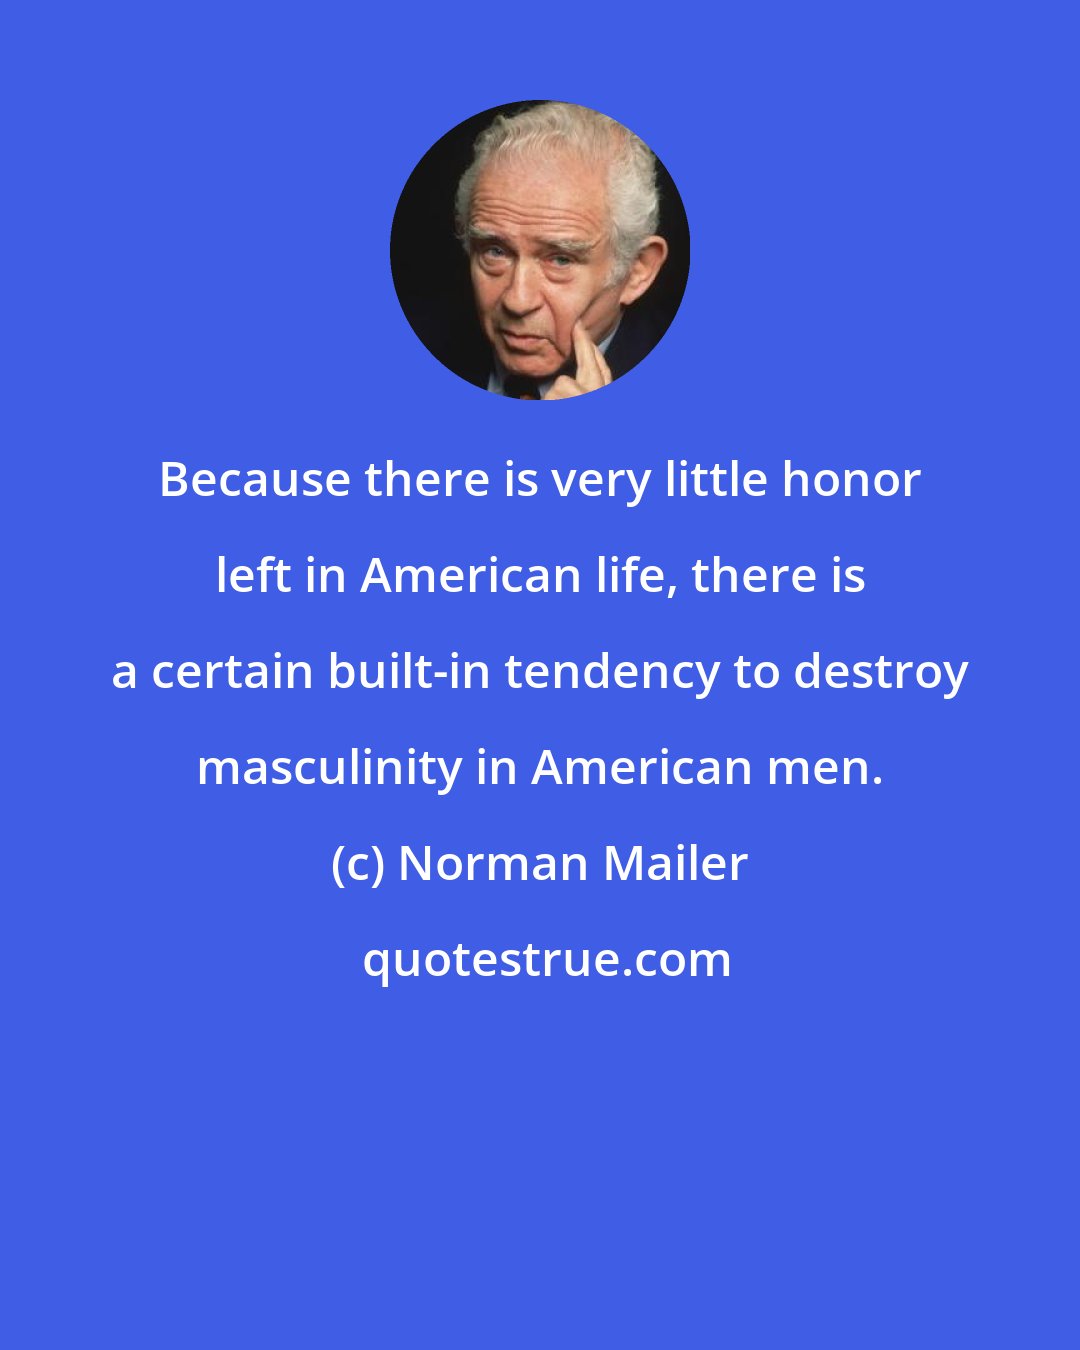 Norman Mailer: Because there is very little honor left in American life, there is a certain built-in tendency to destroy masculinity in American men.